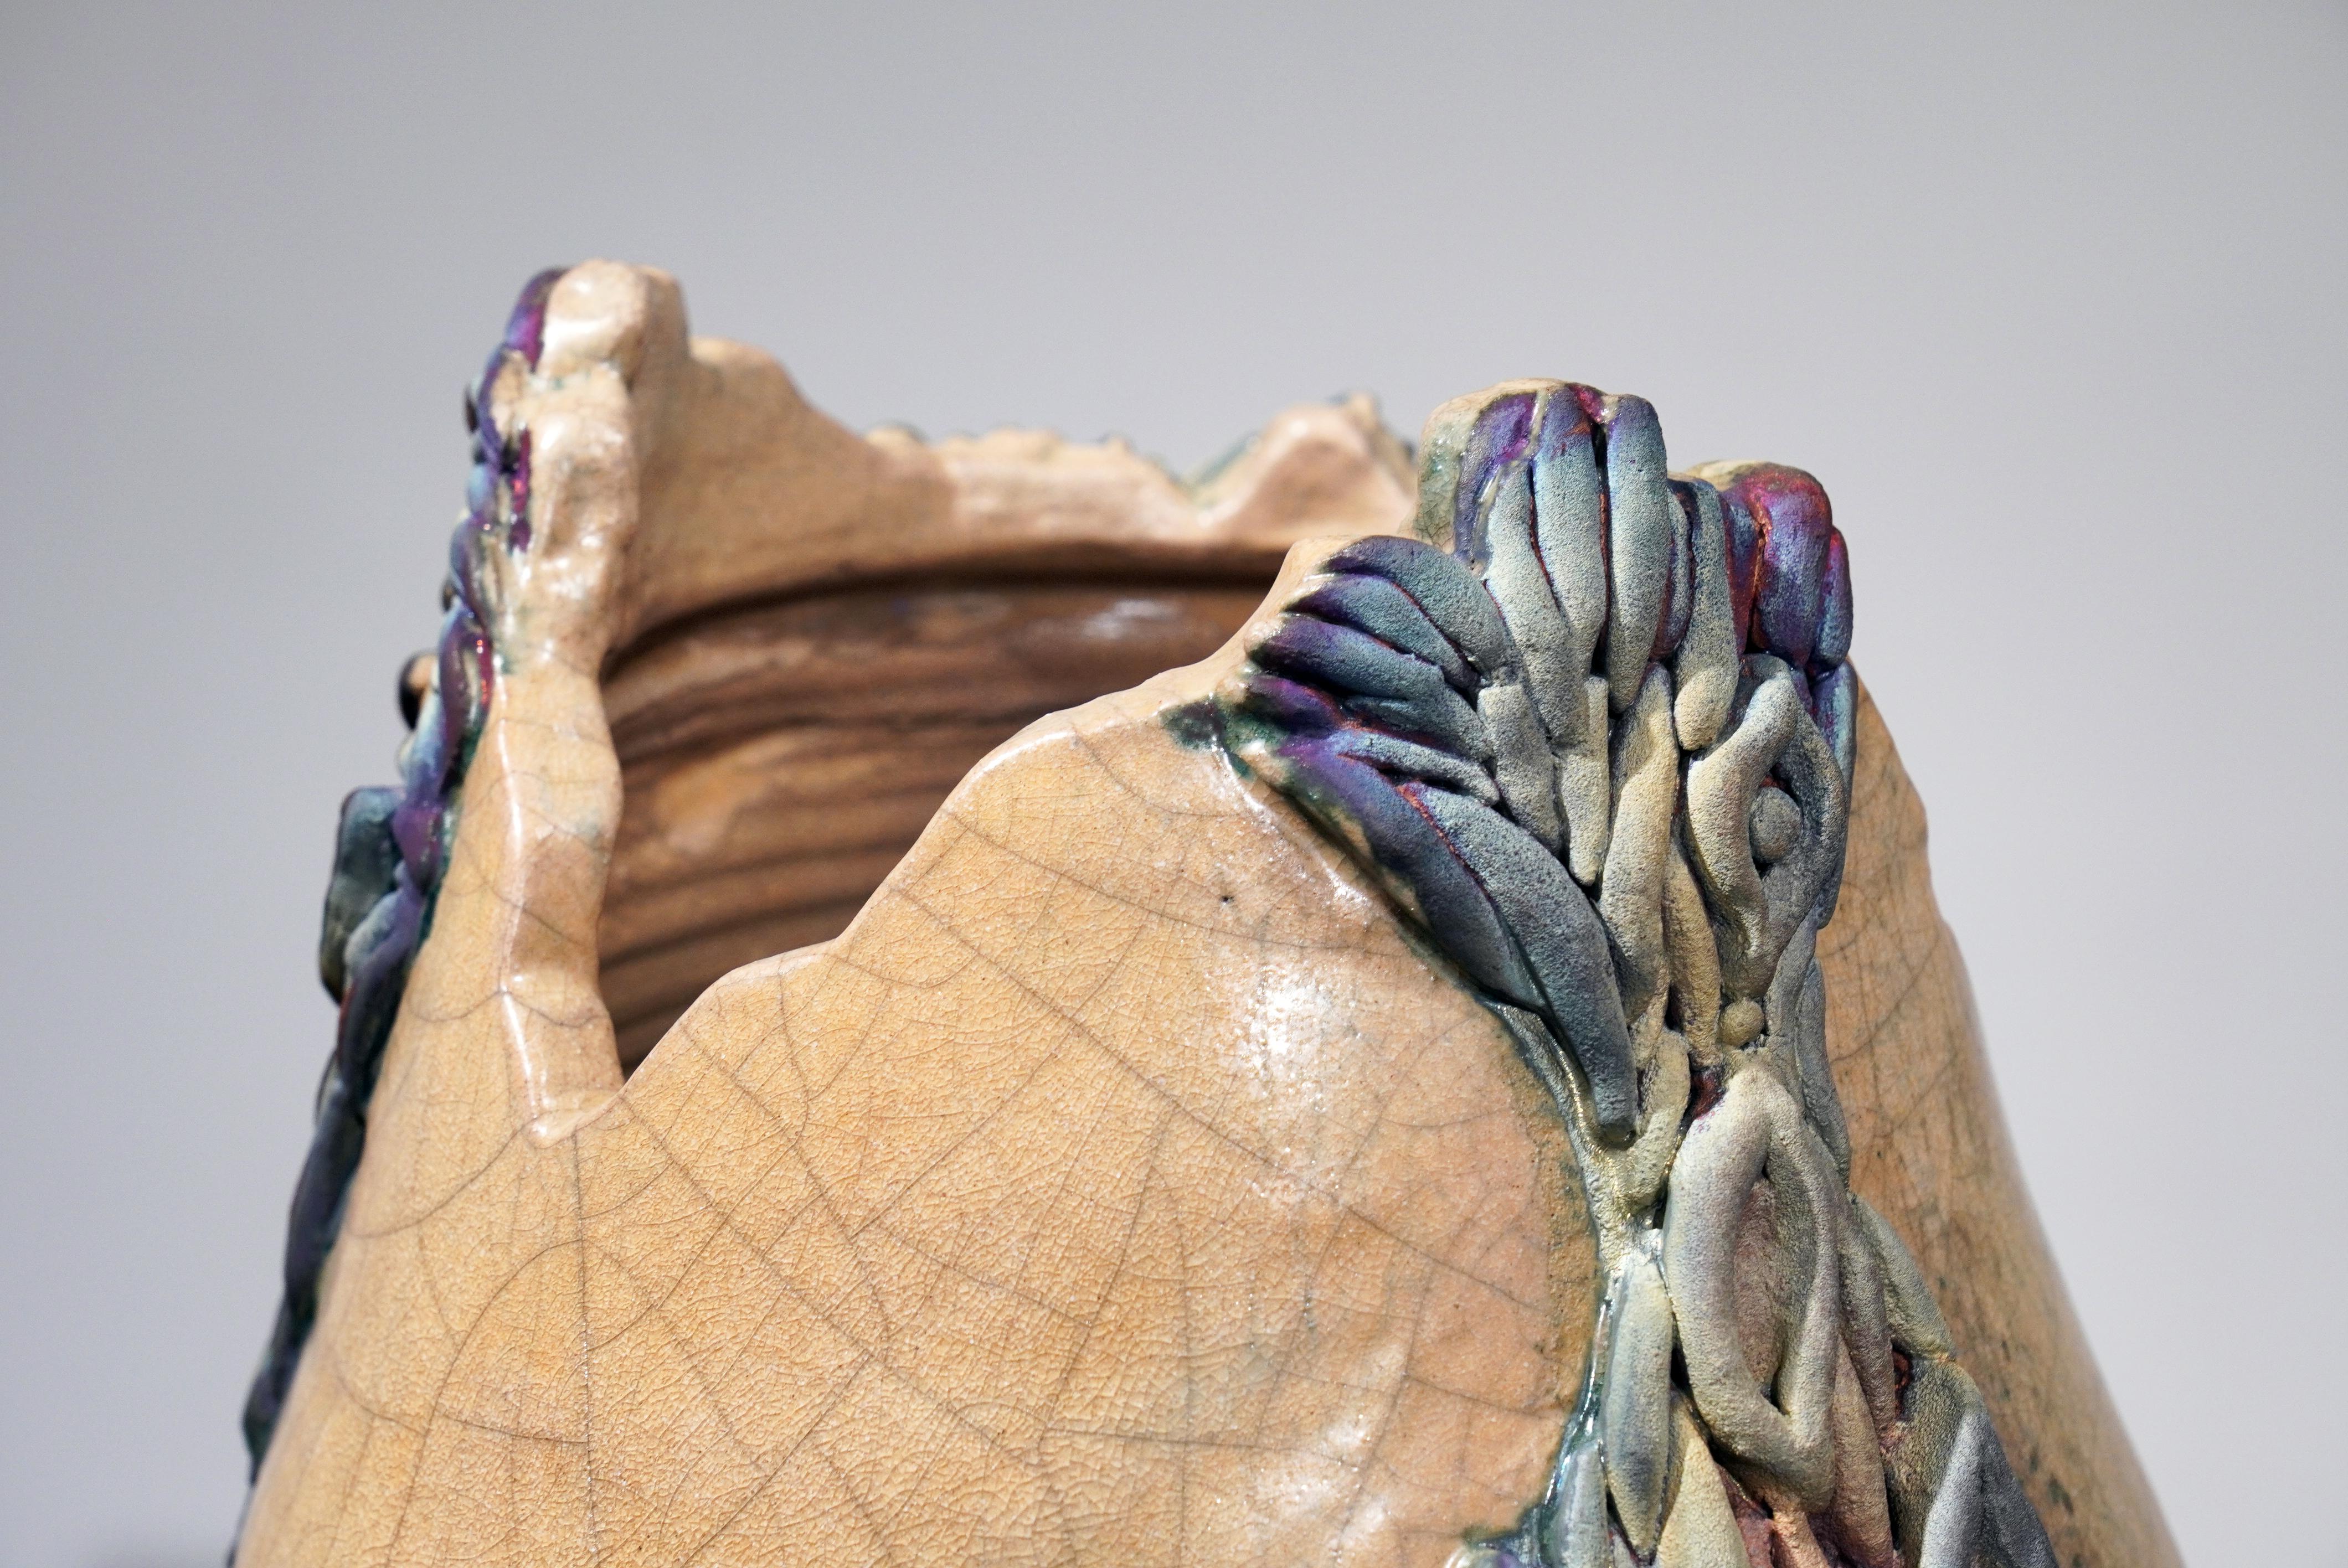 Fired Human - life magnified collection raku ceramic pottery sculpture by Adil Ghani